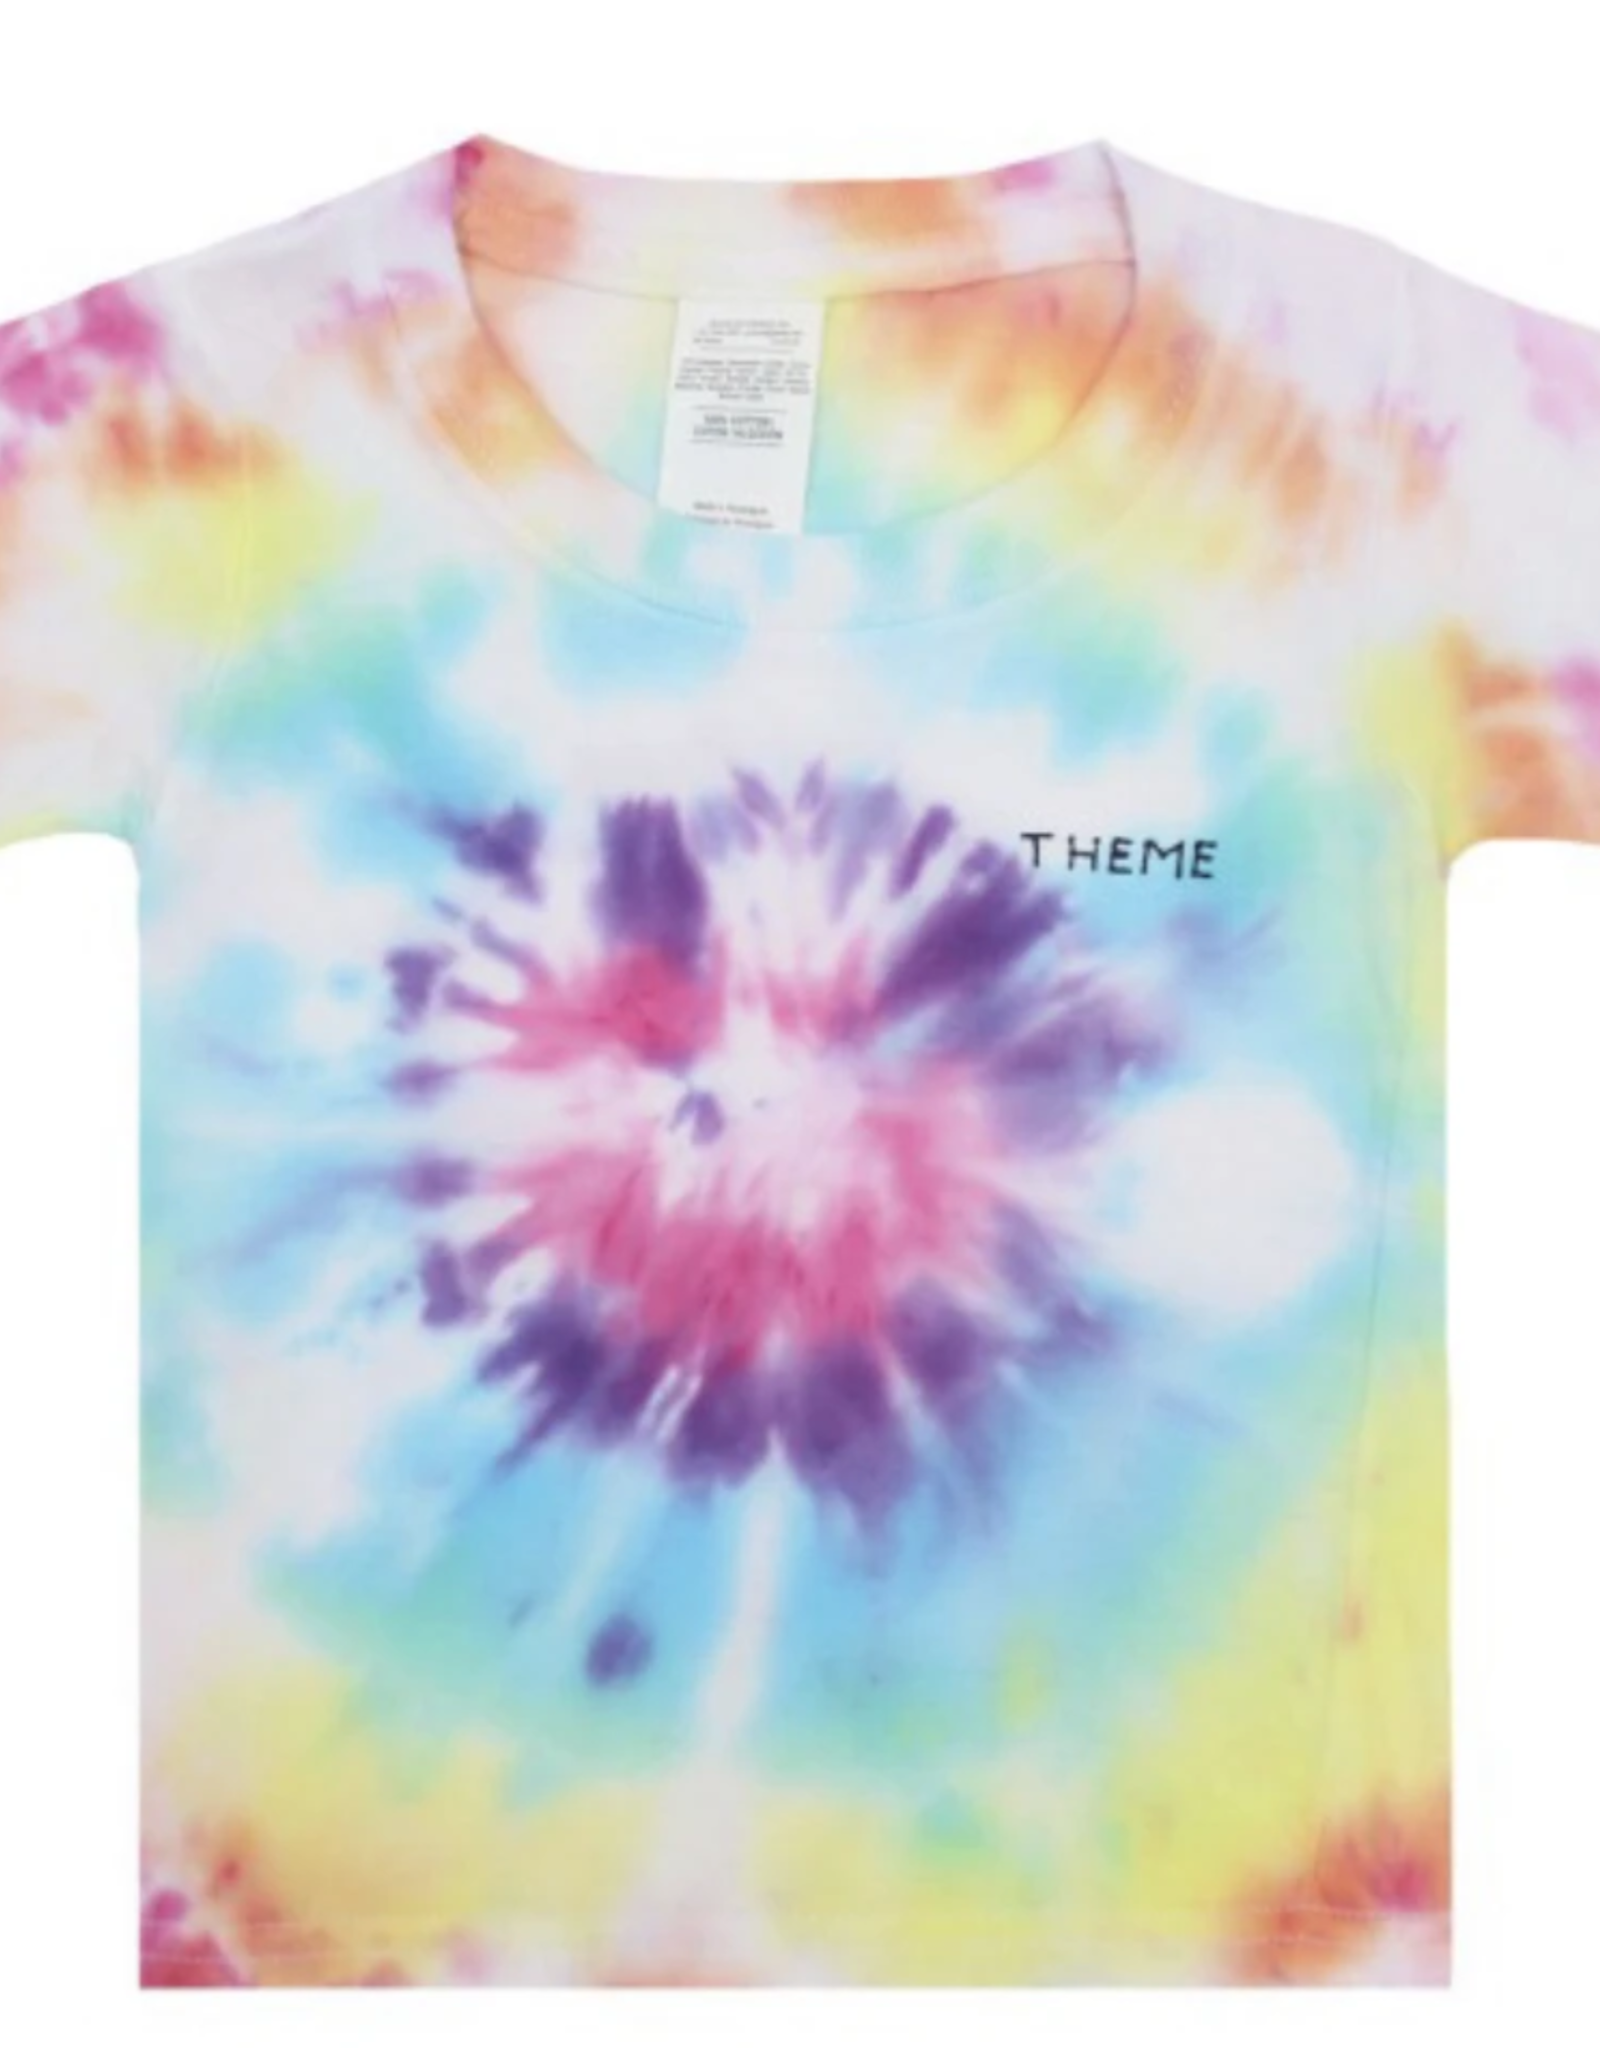 Buy > tie and dye shirt > in stock